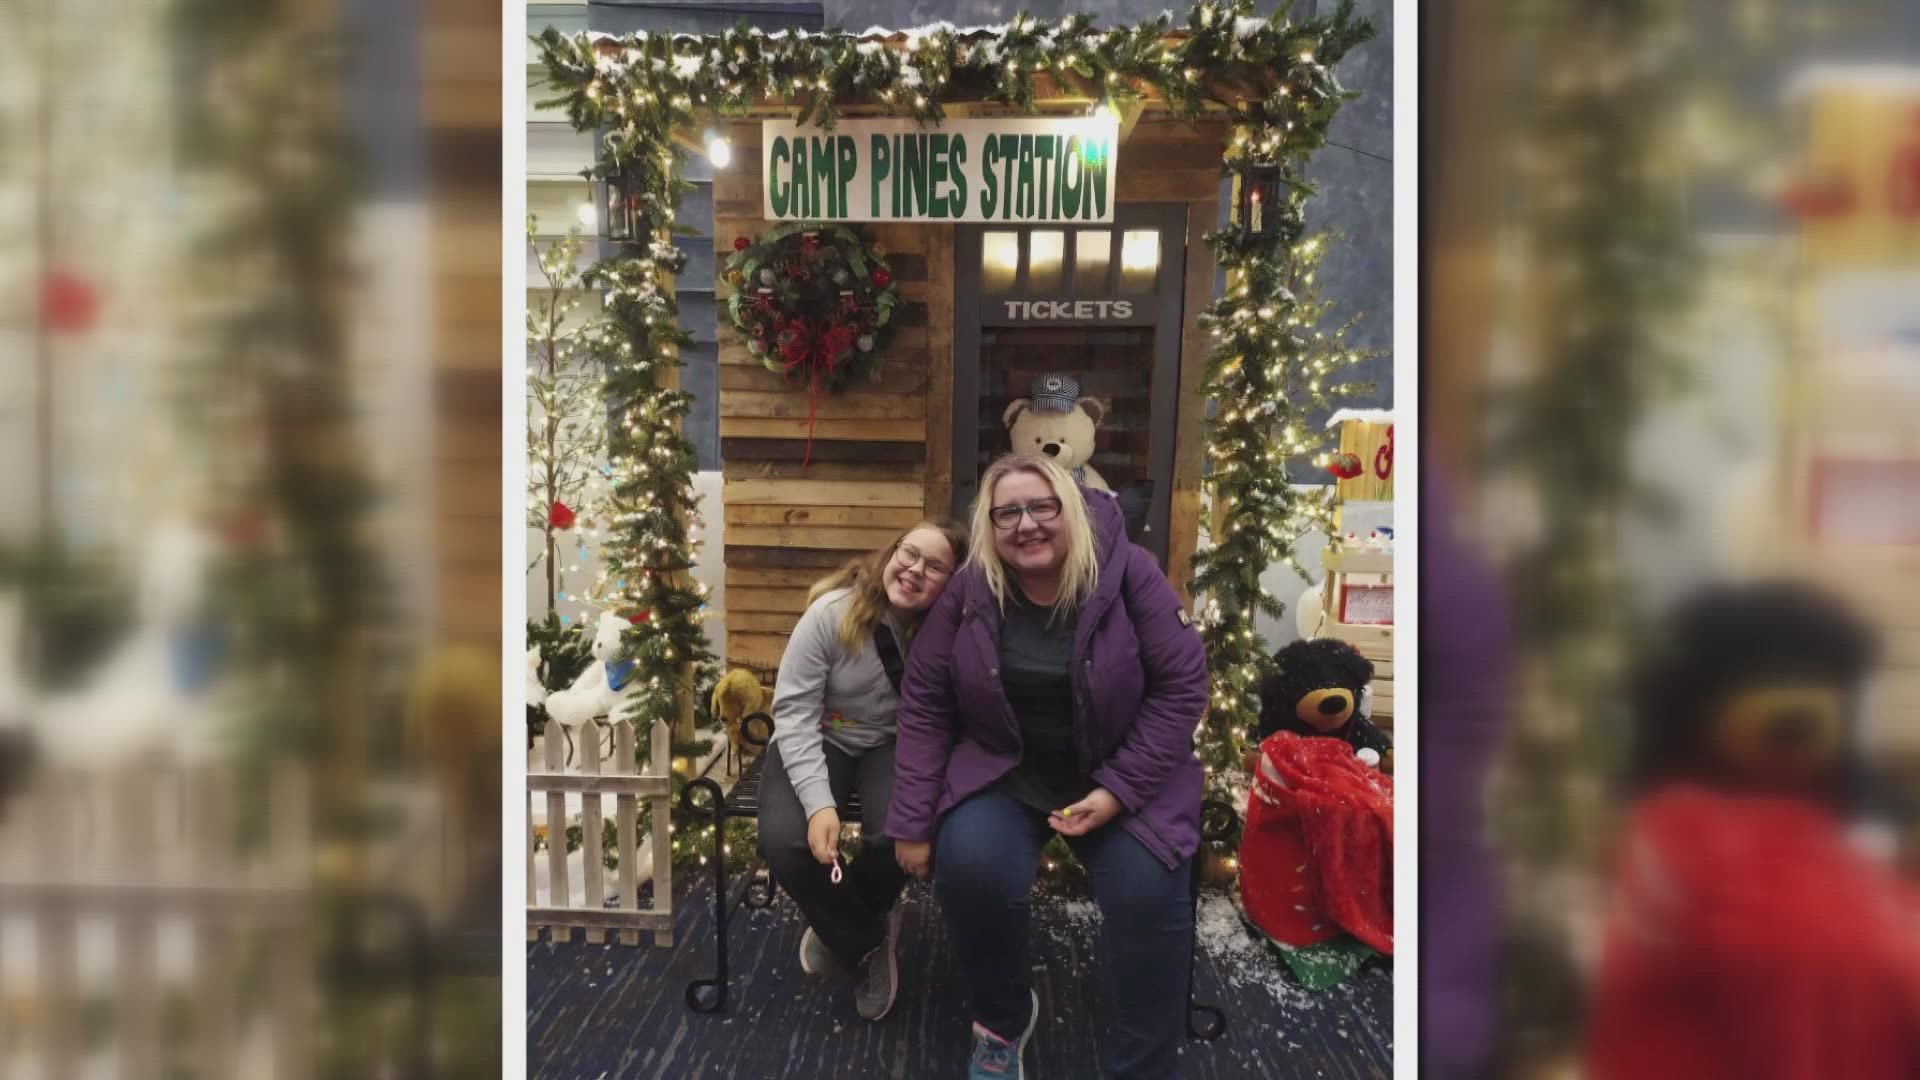 A family arrived in the U.S. in July as part of the Uniting for Ukraine program. Now, they're looking forward to celebrating the holidays in Knoxville.